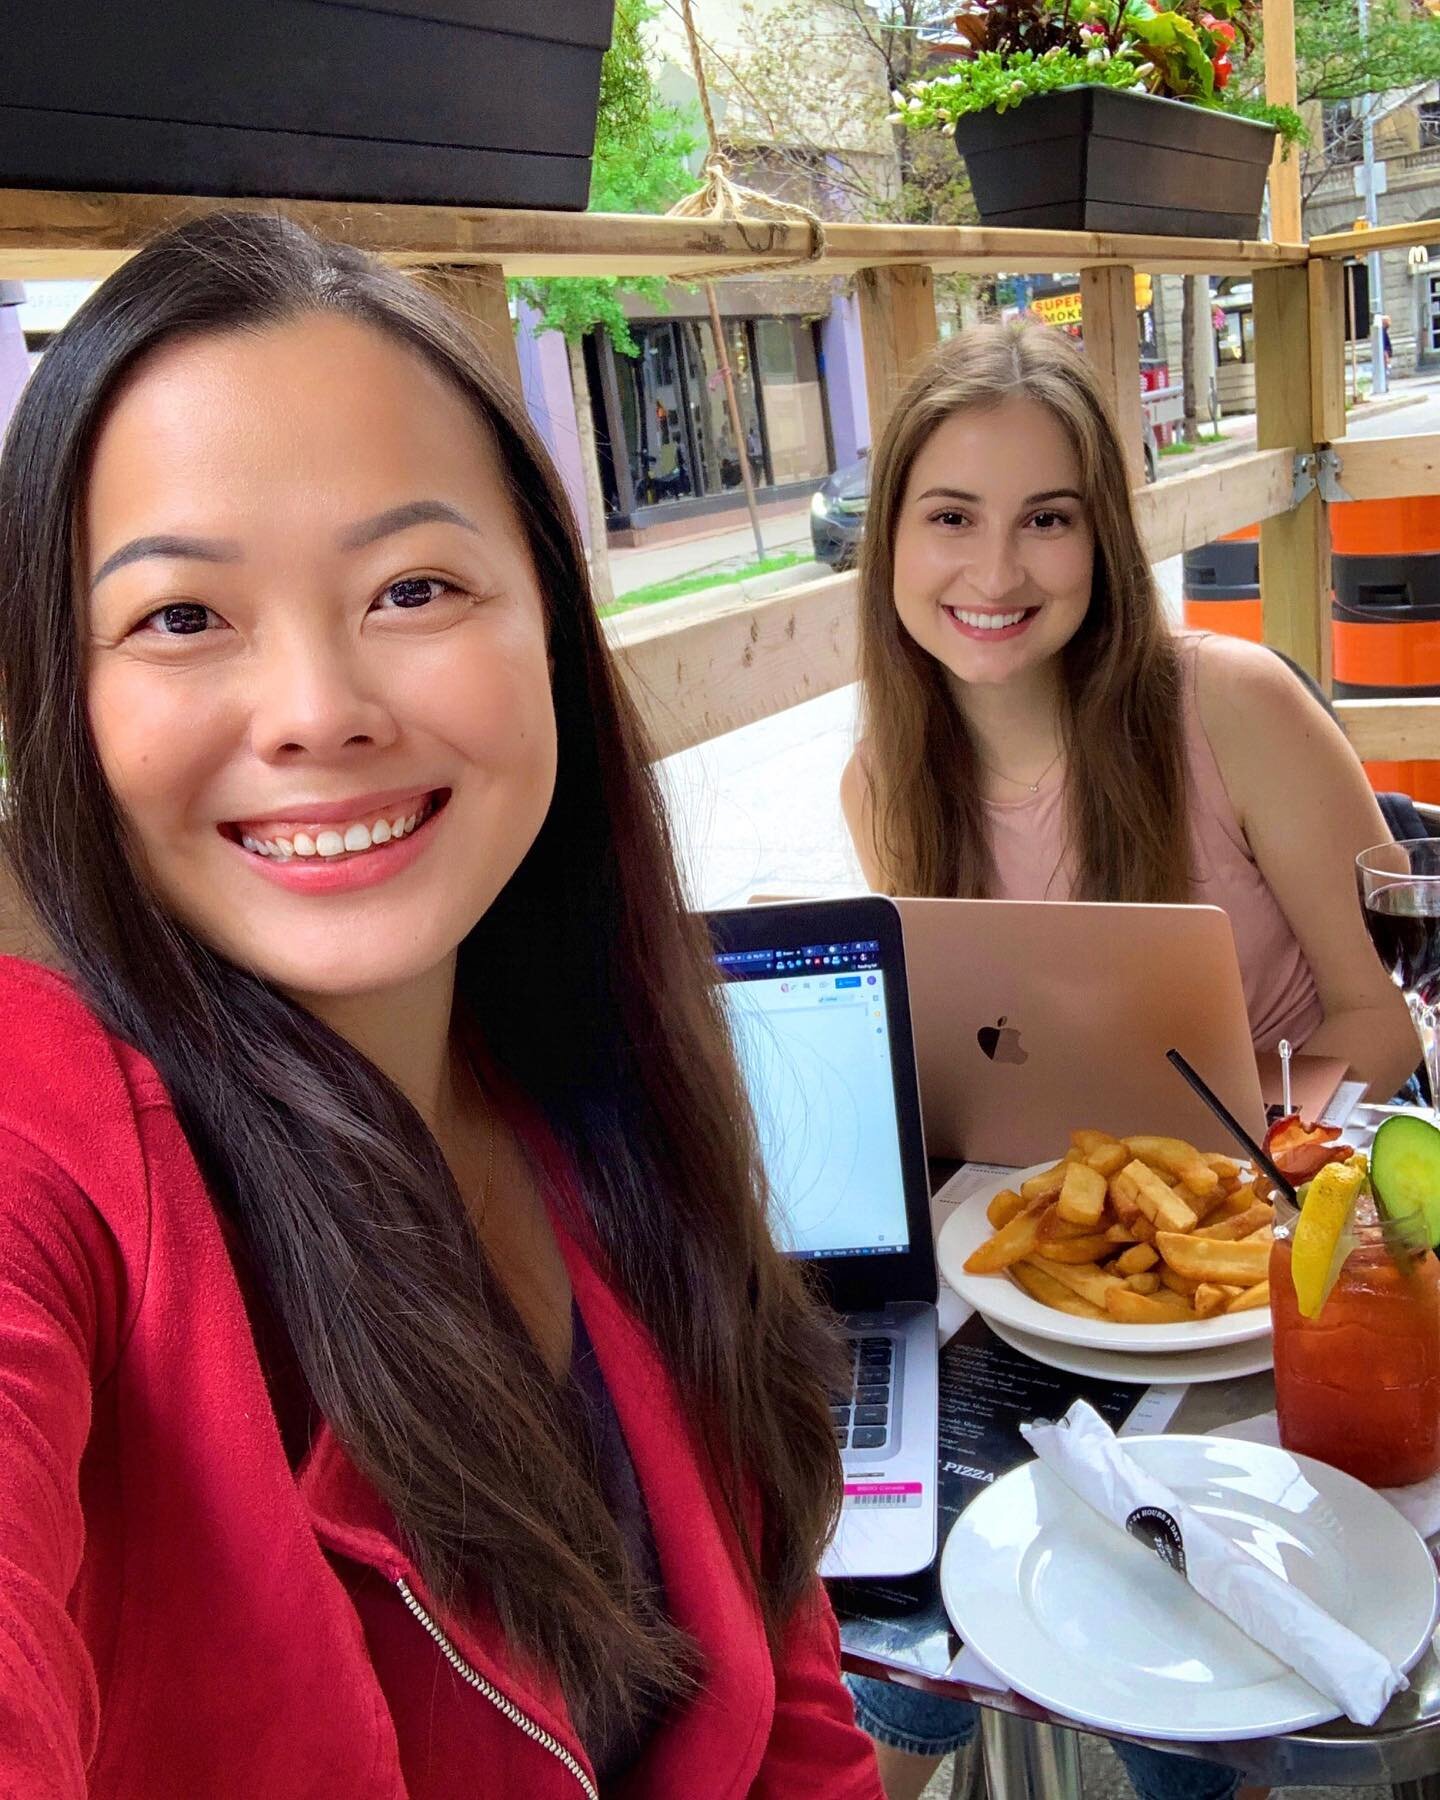 After weeks of virtual development meetings, @karriekwong &amp; @val_lalonde finally had an in-person session for our newest YDP project - a series that&rsquo;s finally (maybe) got a working title! The best part? Improv scene work to dive further int